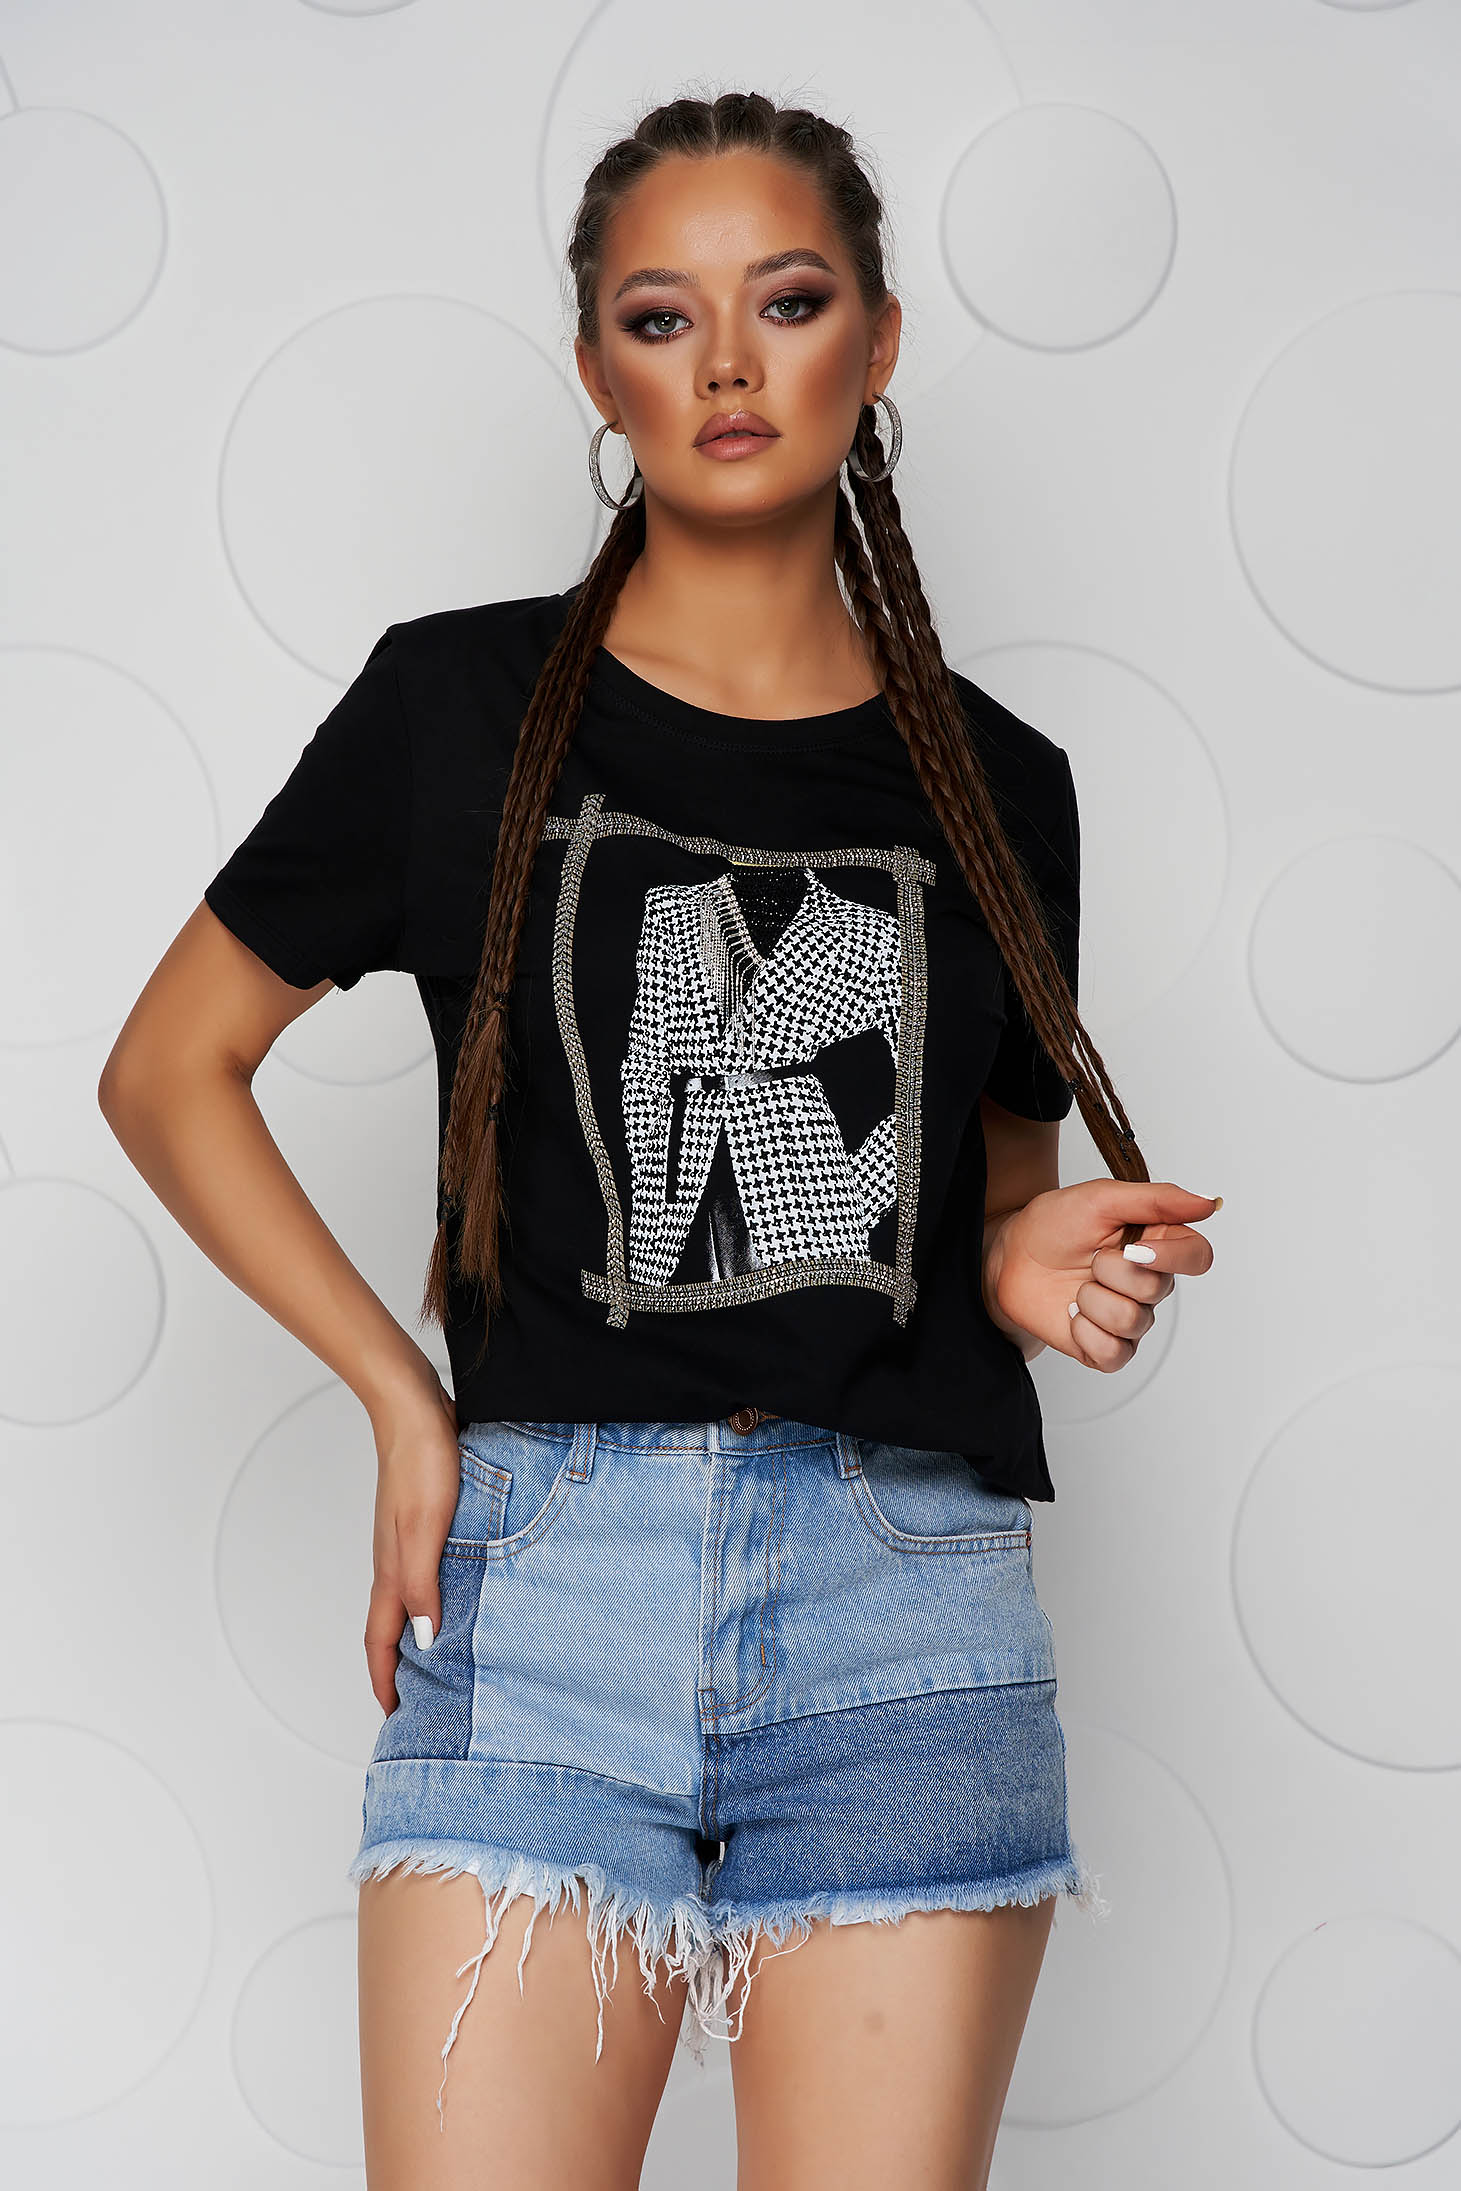 Black t-shirt cotton loose fit with rounded cleavage with graphic details